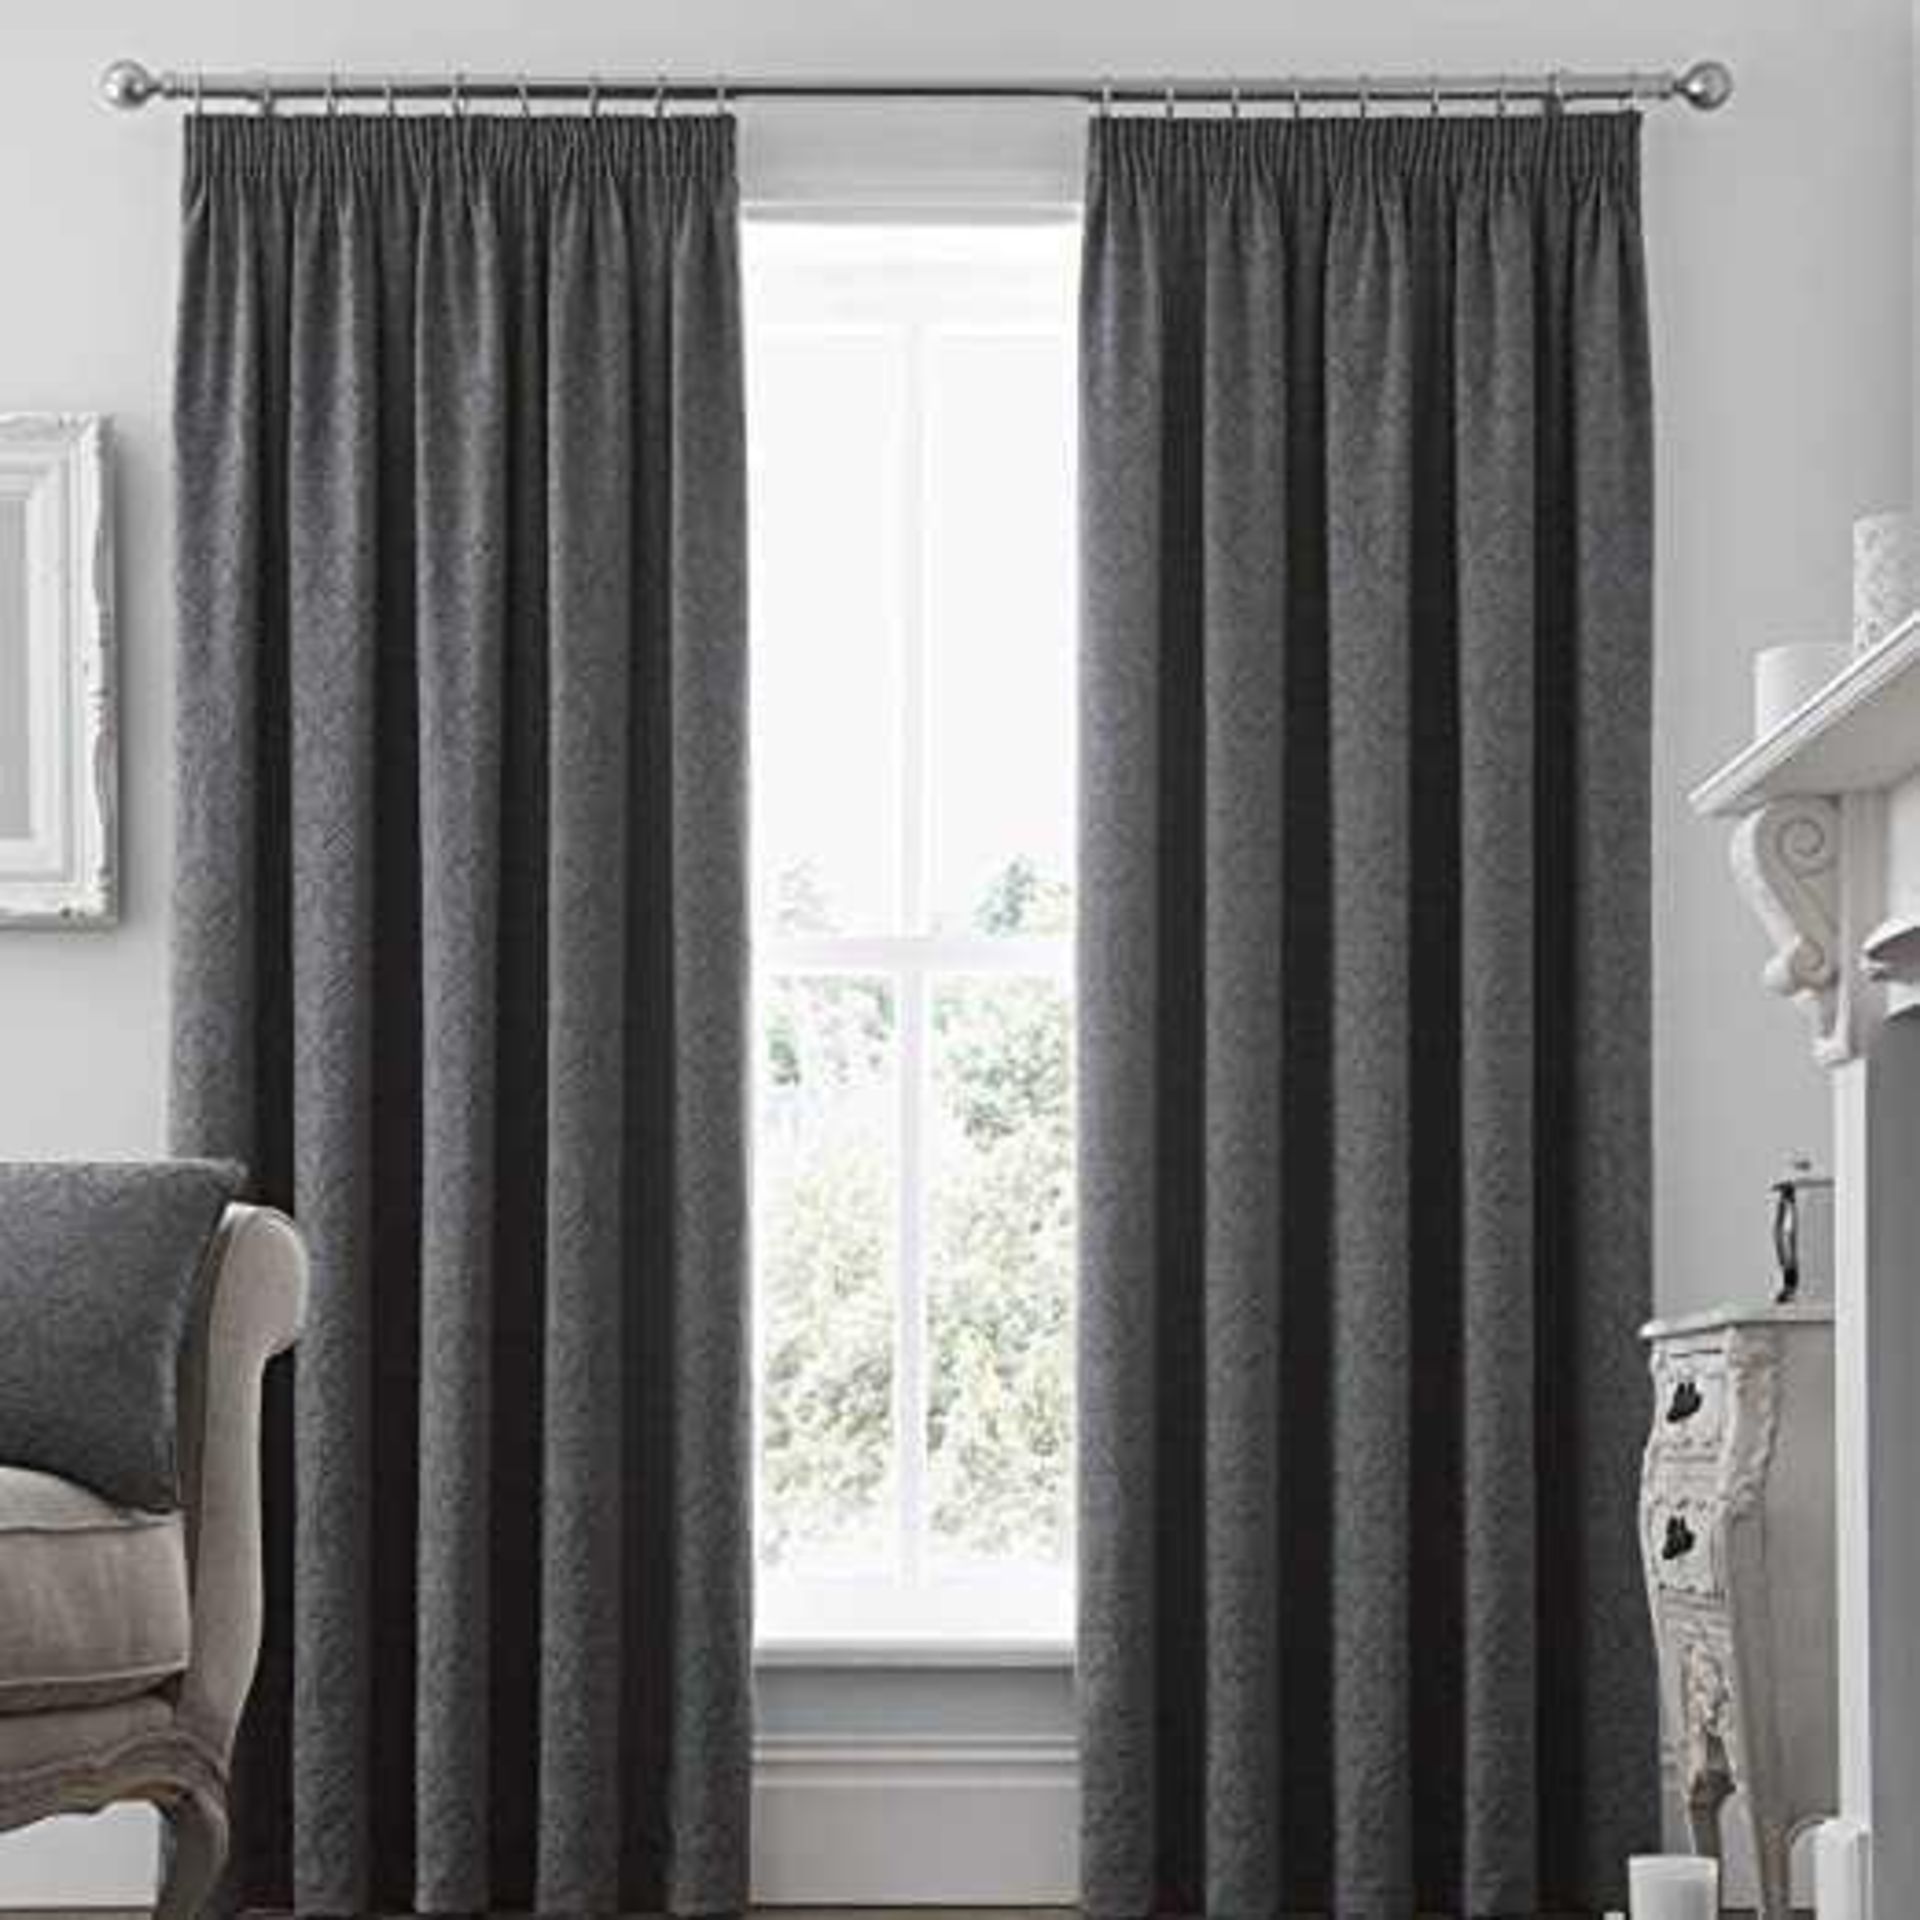 Combined Rrp £175 Lot To Contain 3 Assorted Curtains - Image 6 of 8